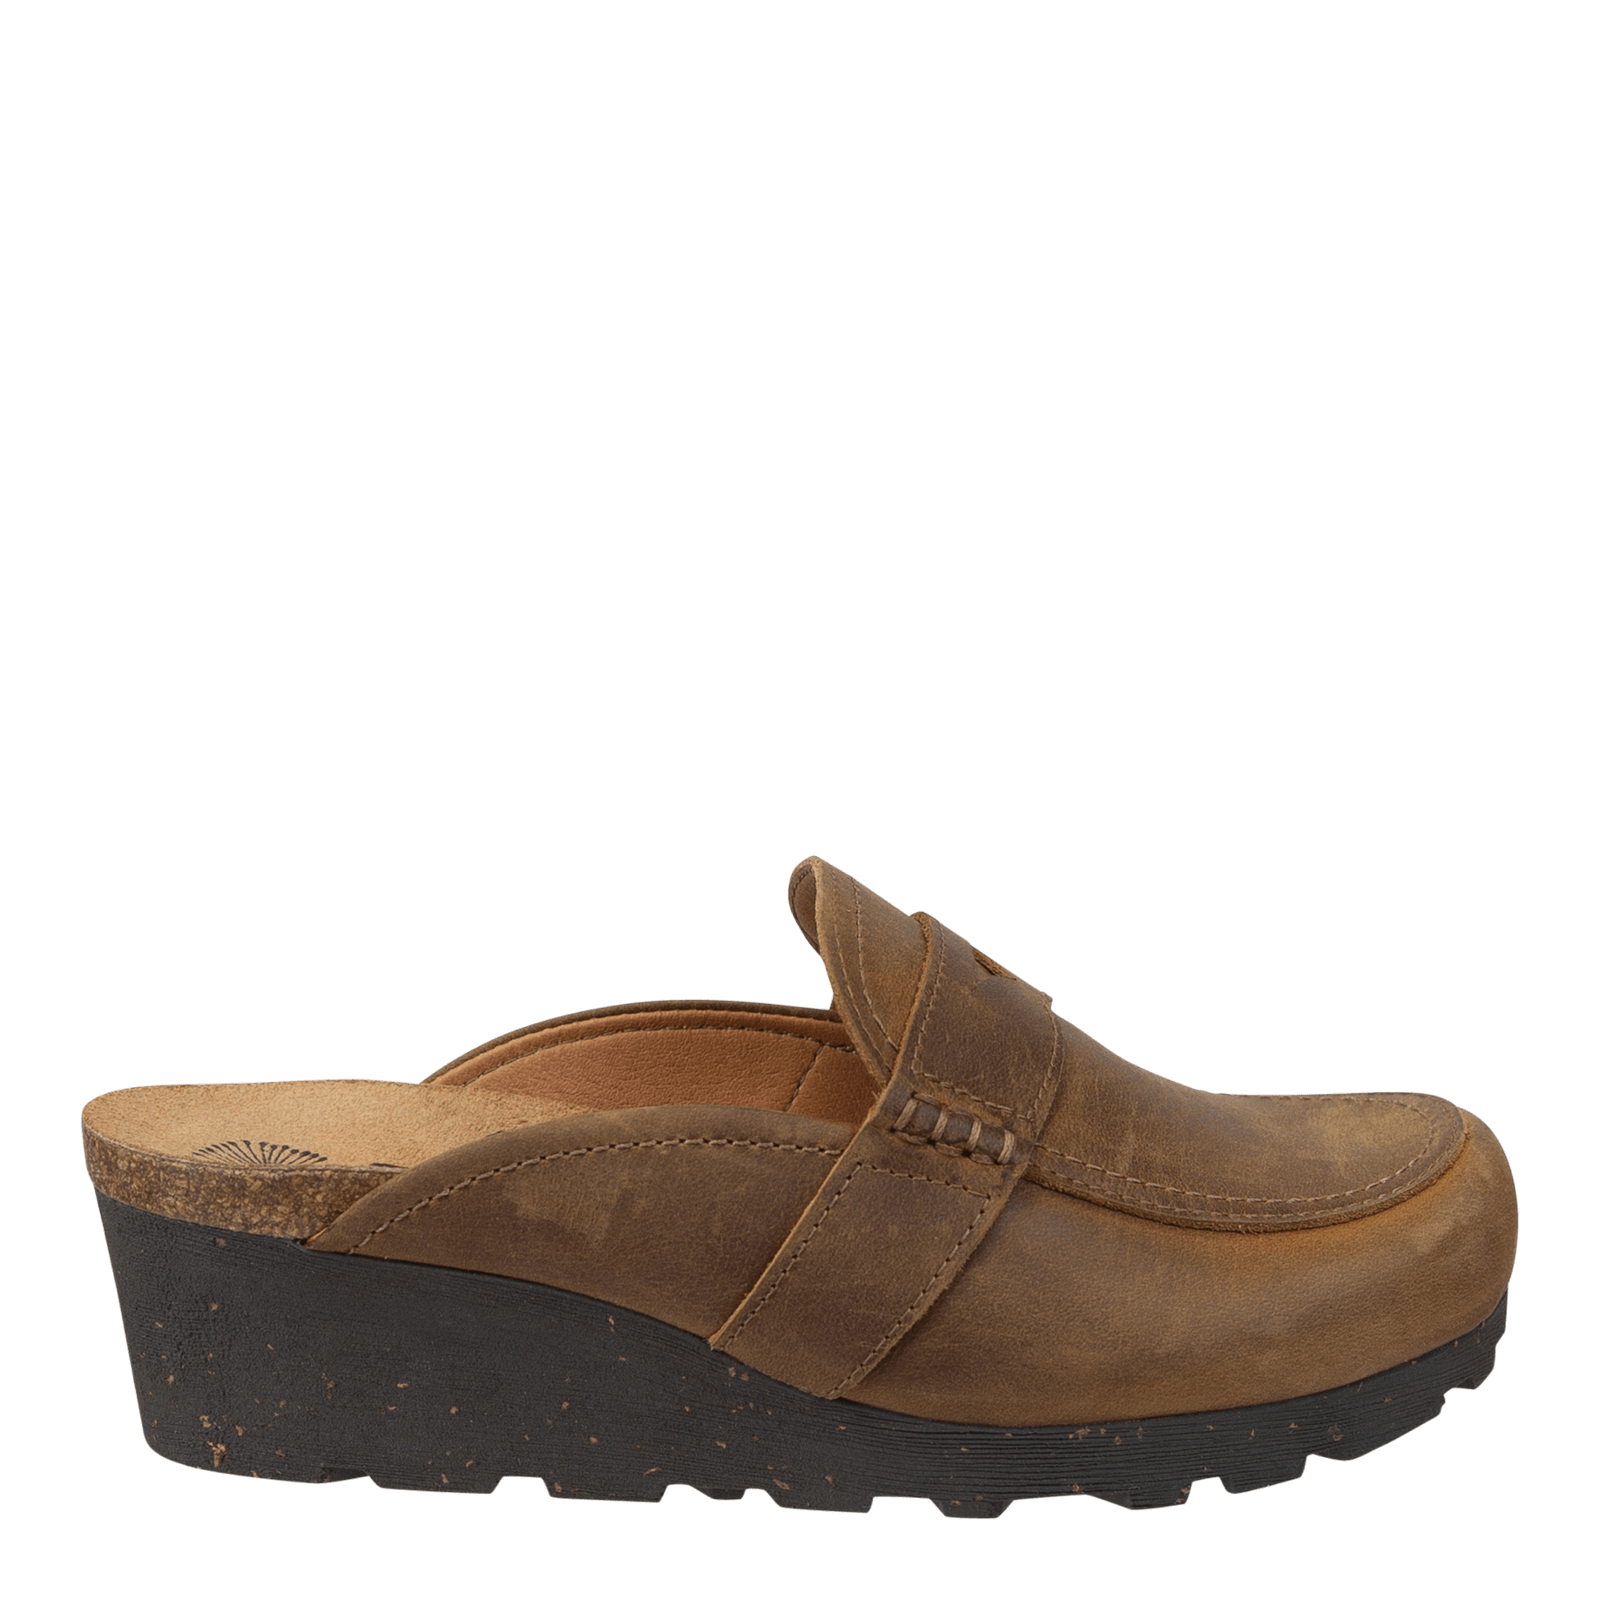 ESTONIA in CHAMOIS Heeled Clogs - musthaveSHOES